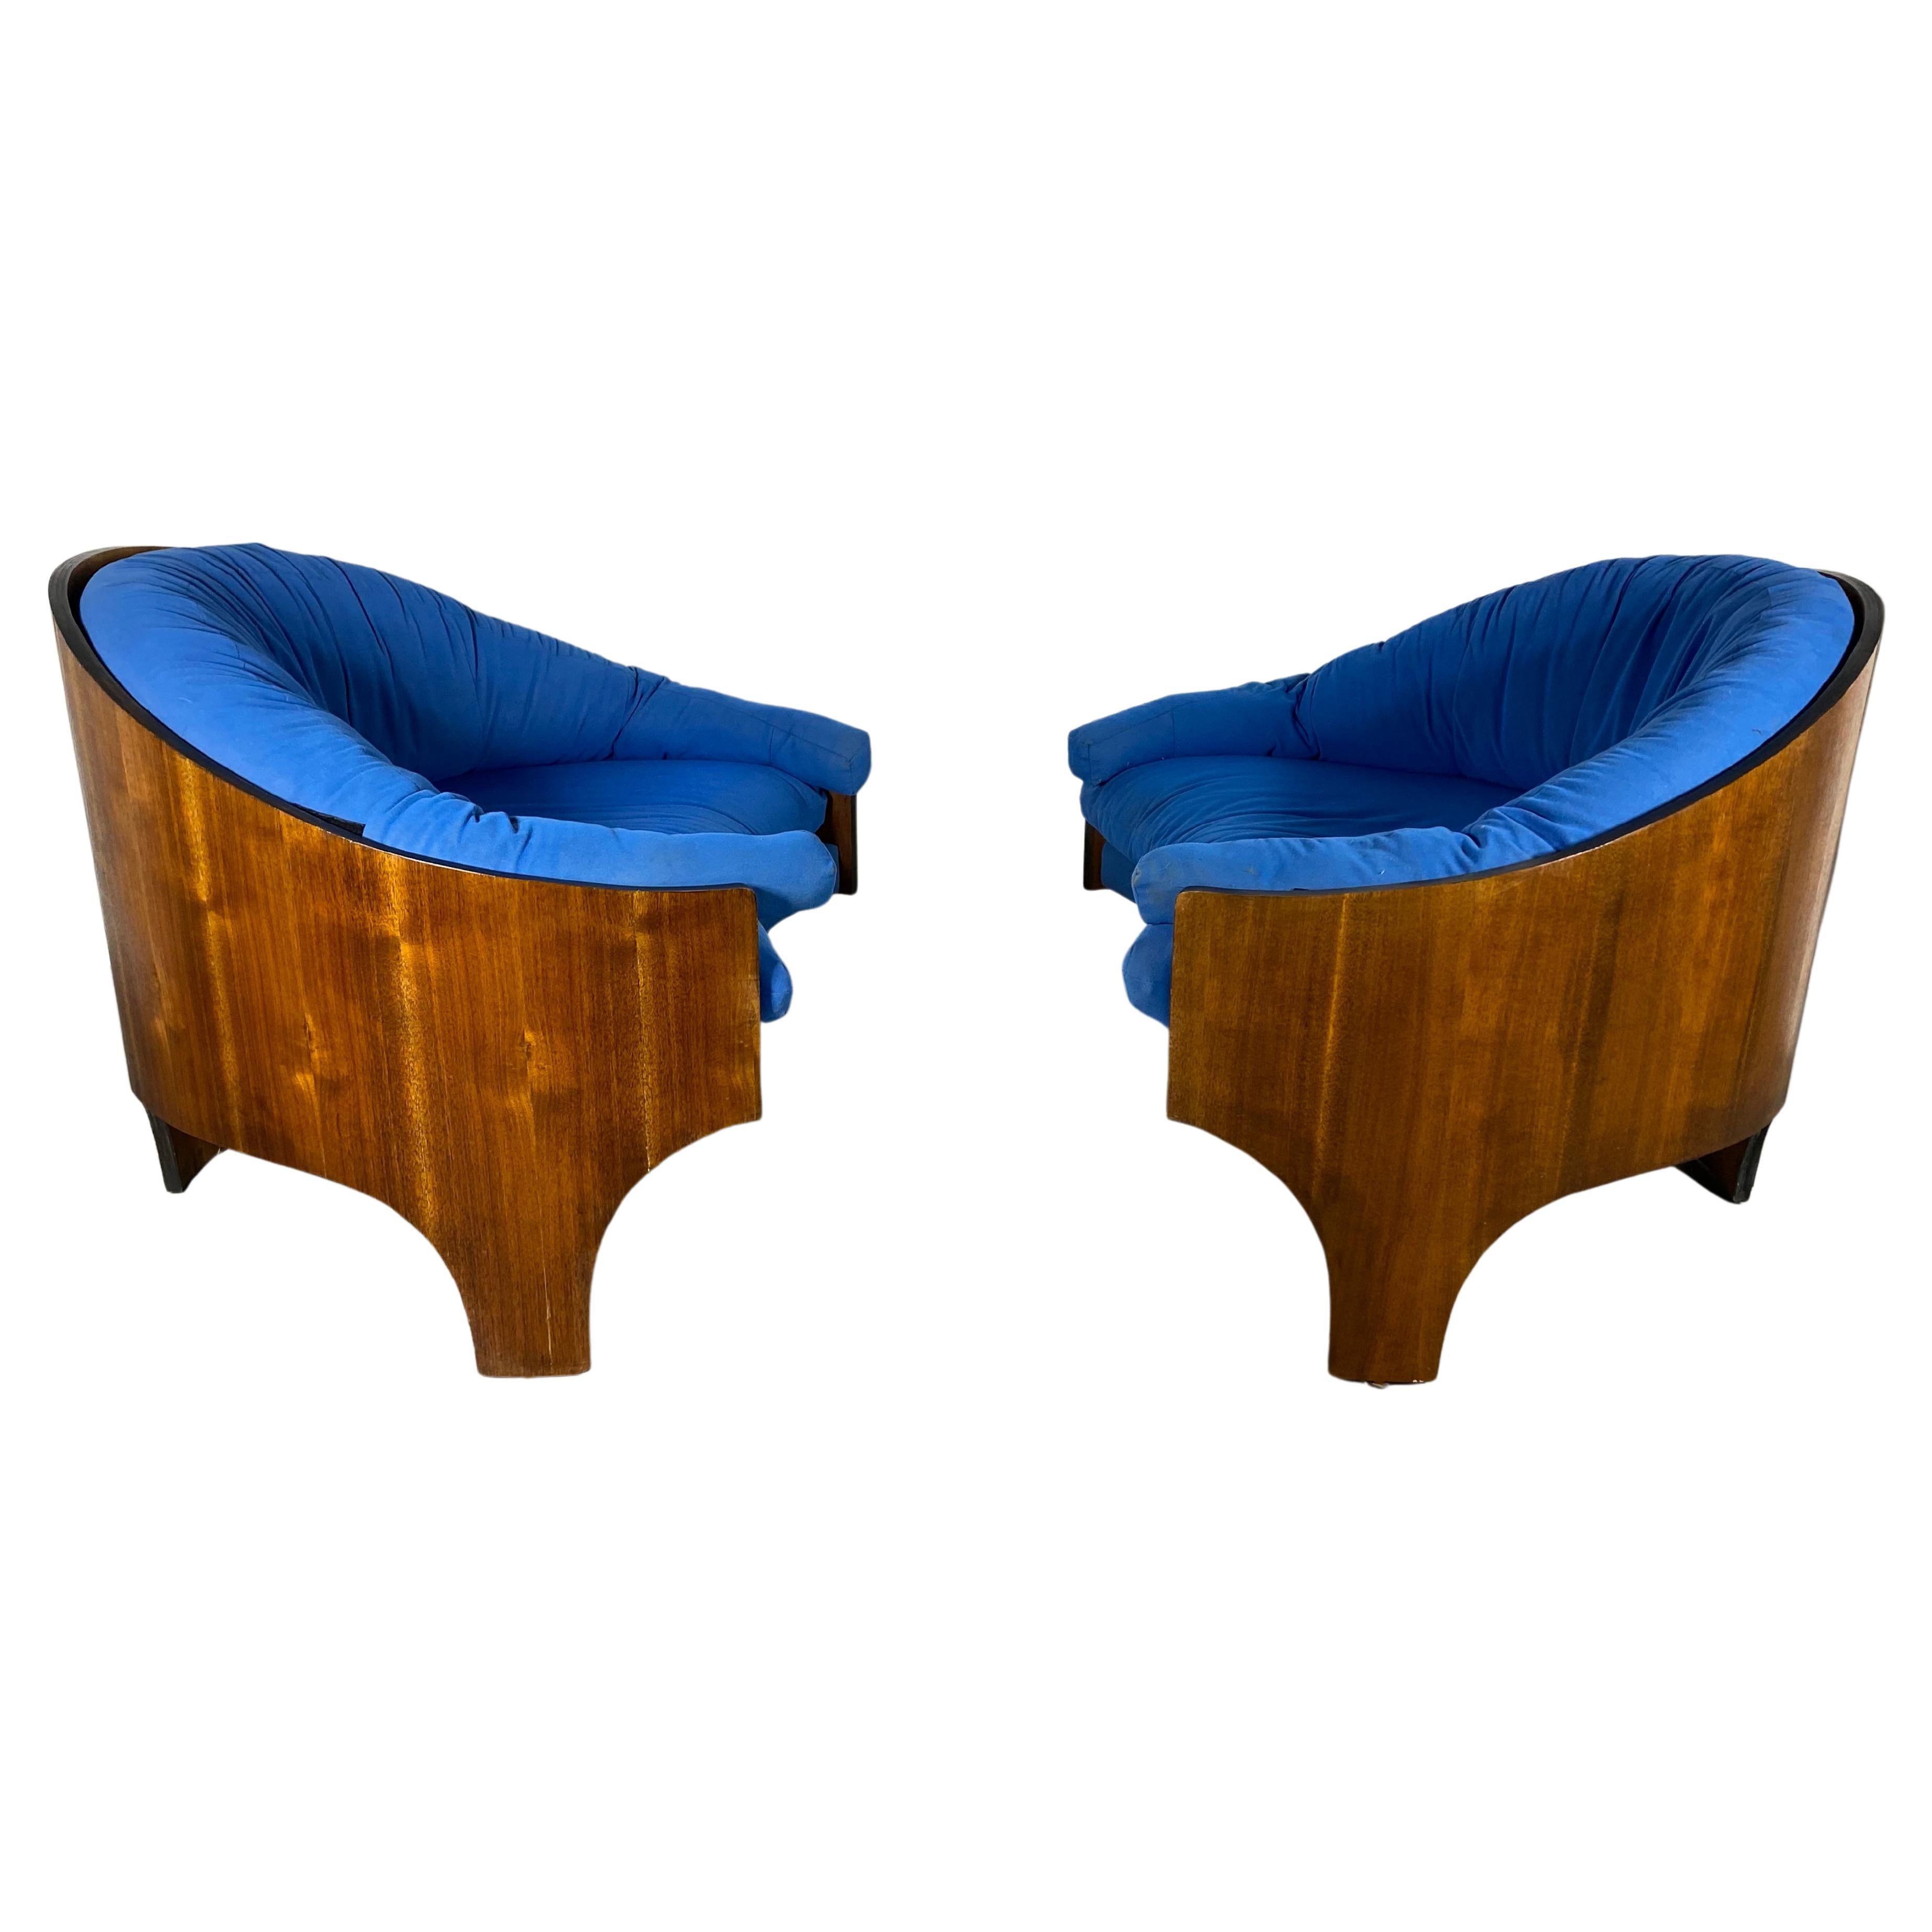 Henry Glass Intimate Island Lounge Chairs Stunning Moulded Walnut